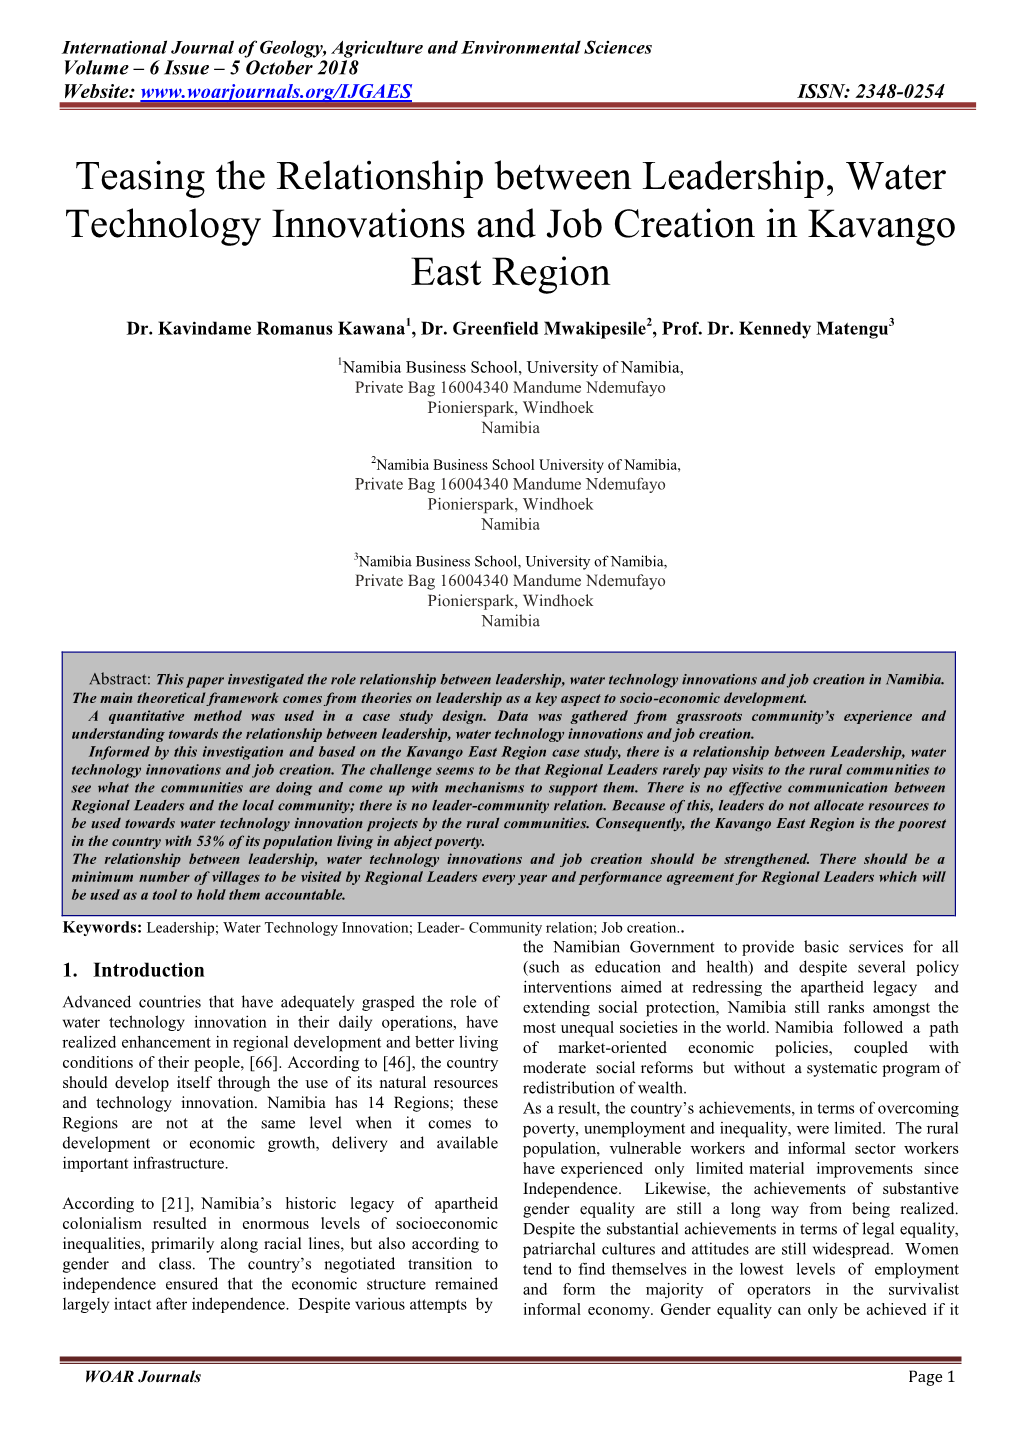 Teasing the Relationship Between Leadership, Water Technology Innovations and Job Creation in Kavango East Region